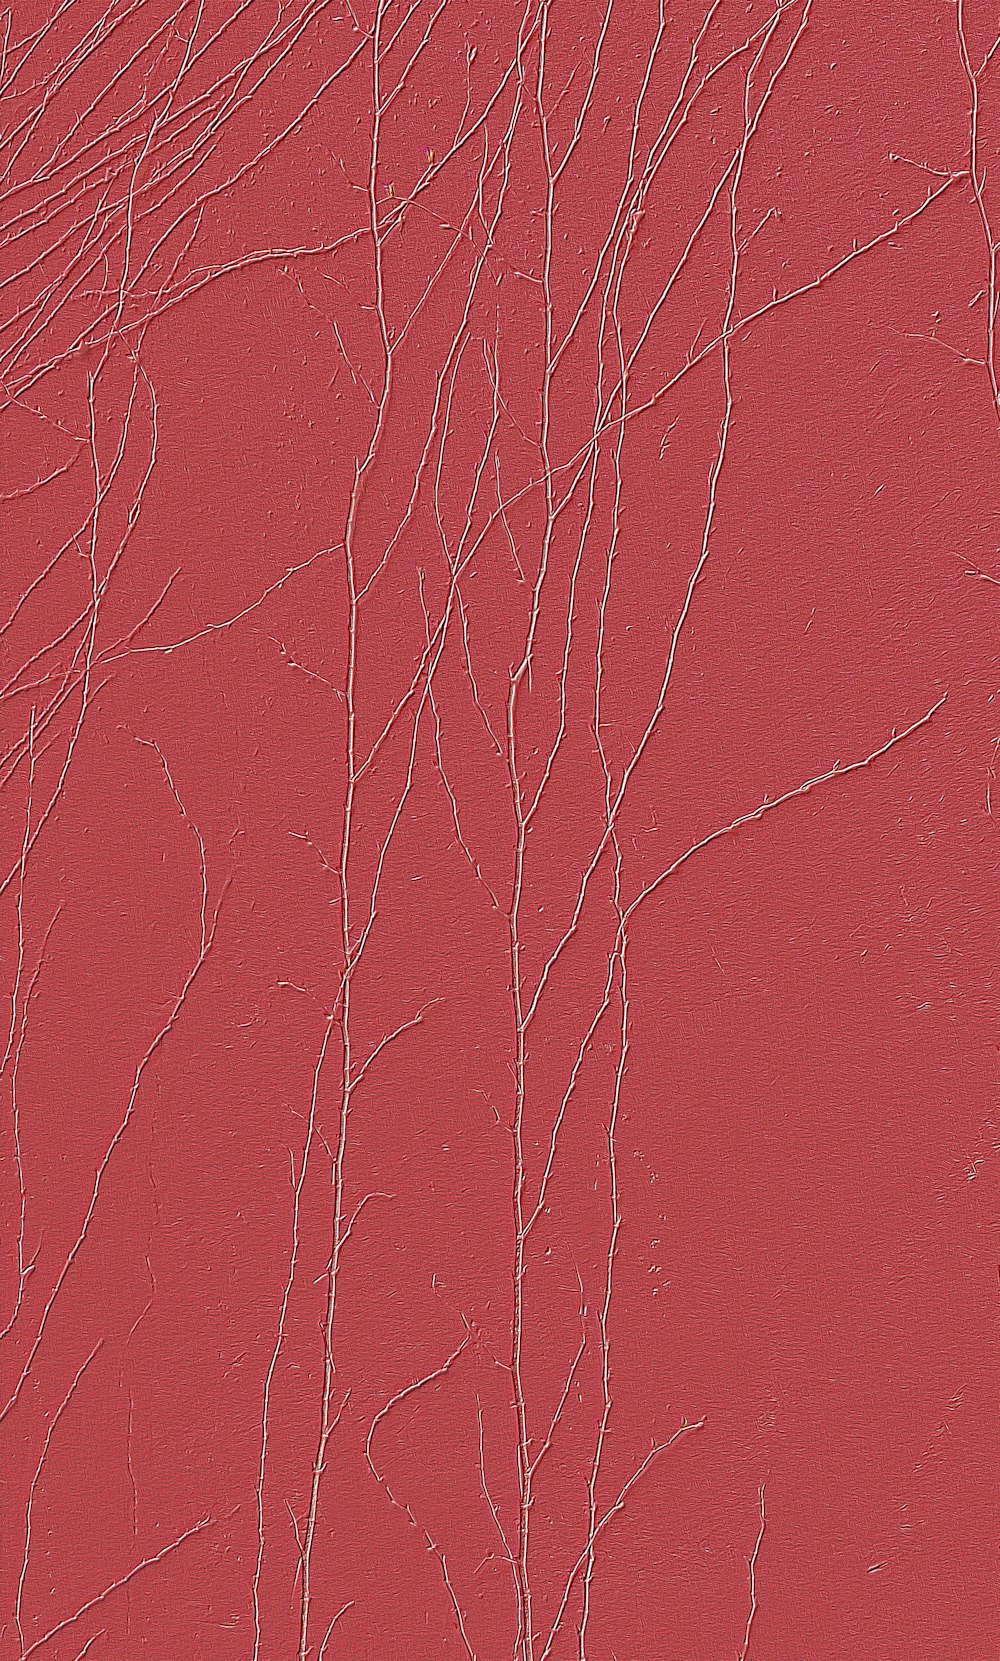 a close up of a red wall with vines on it